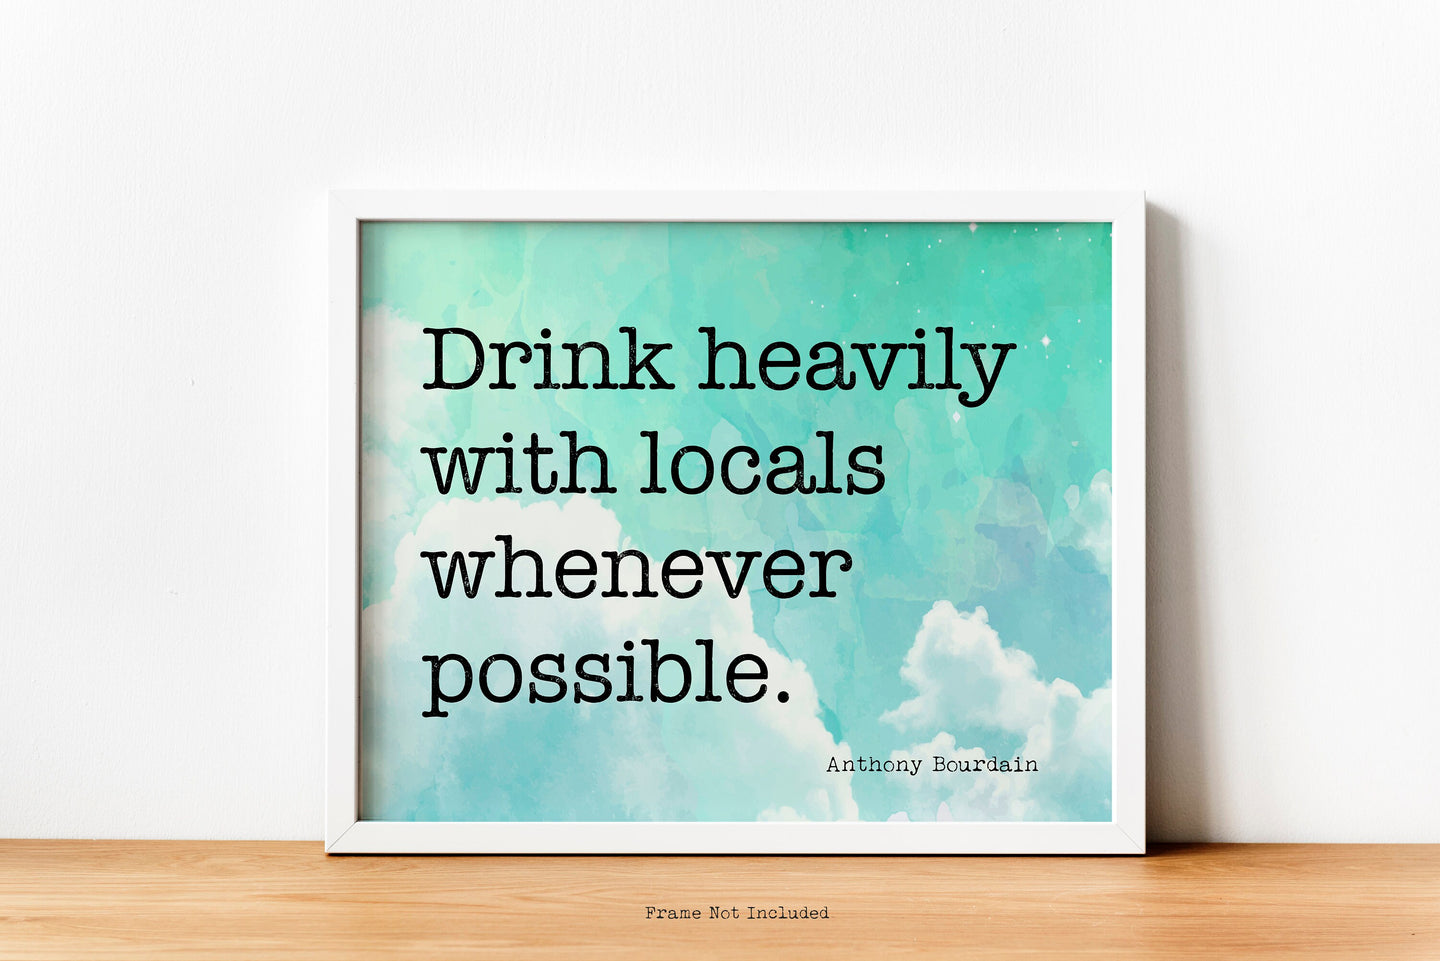 Anthony Bourdain Print - Drink heavily with locals whenever possible - UNFRAMED inspirational print for Home, Inspirational bourdain quote